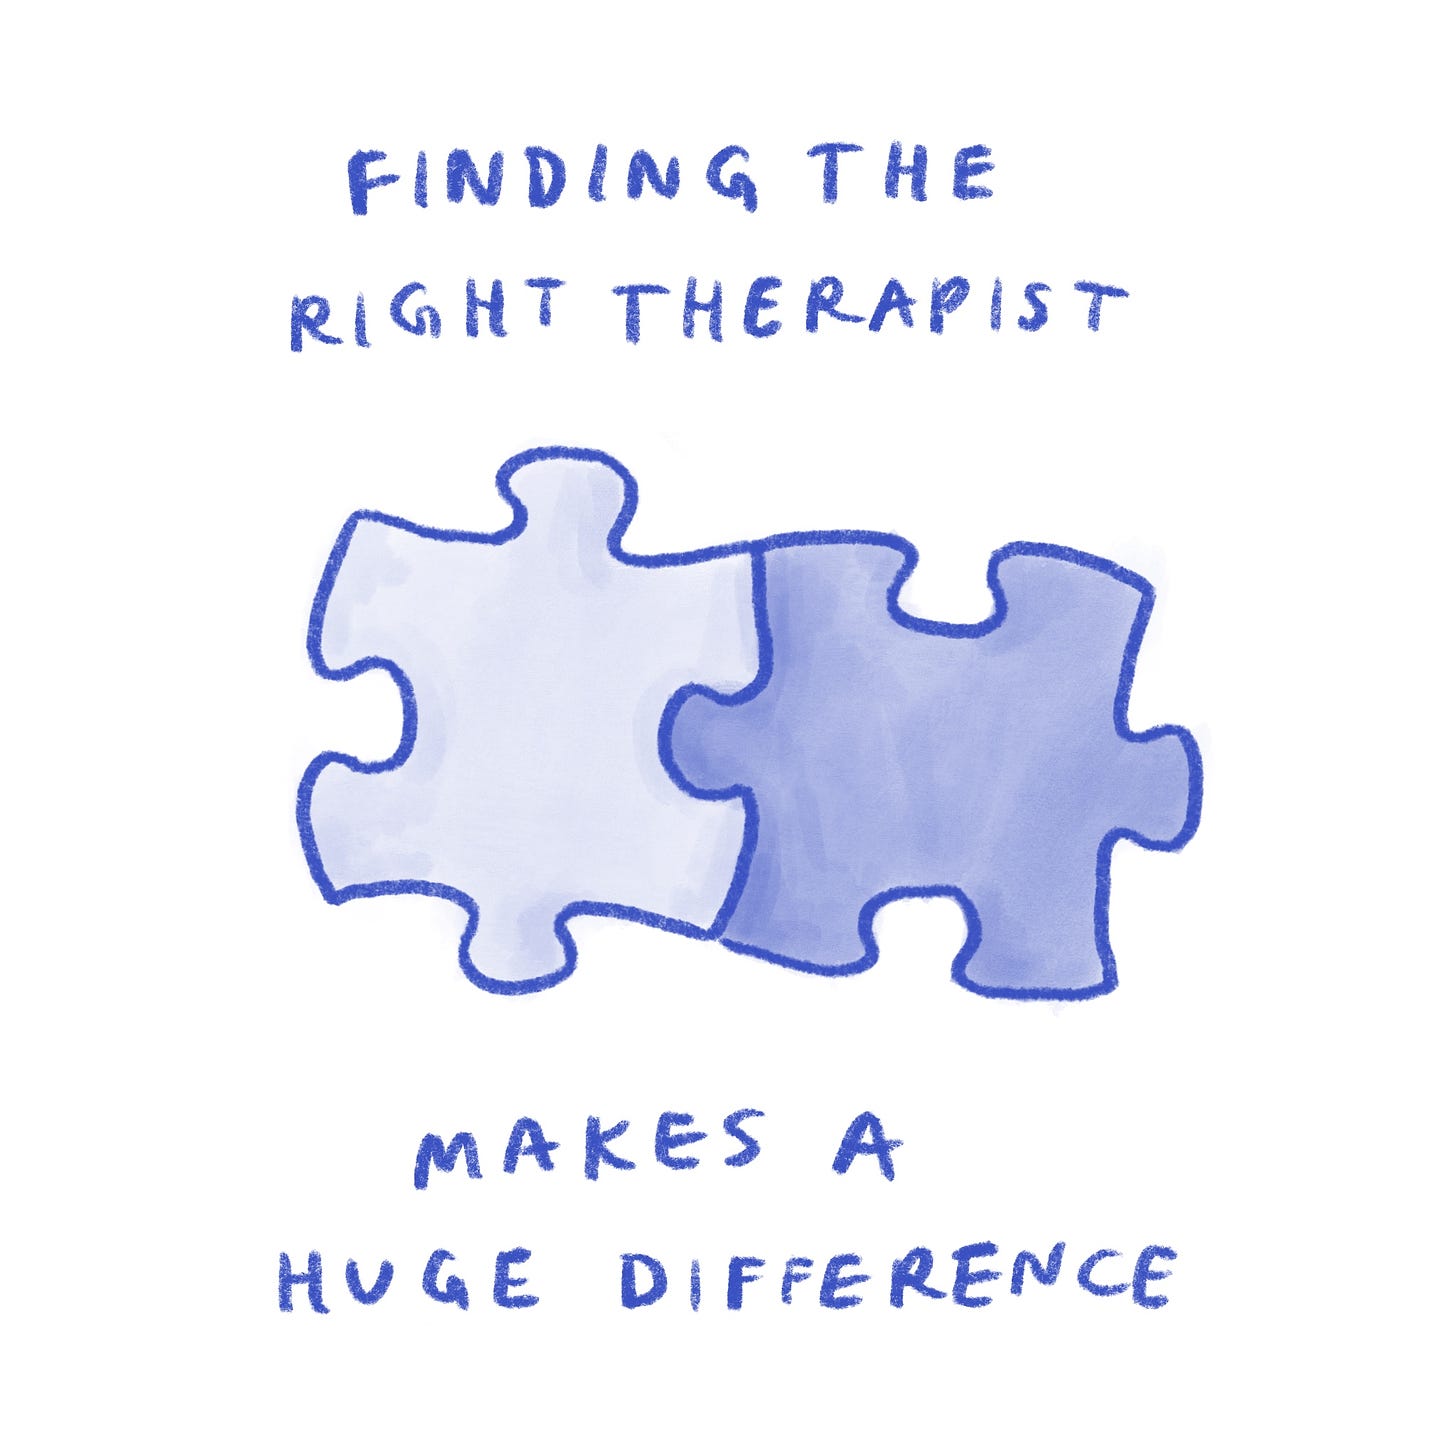 Finding the right therapist makes a huge difference